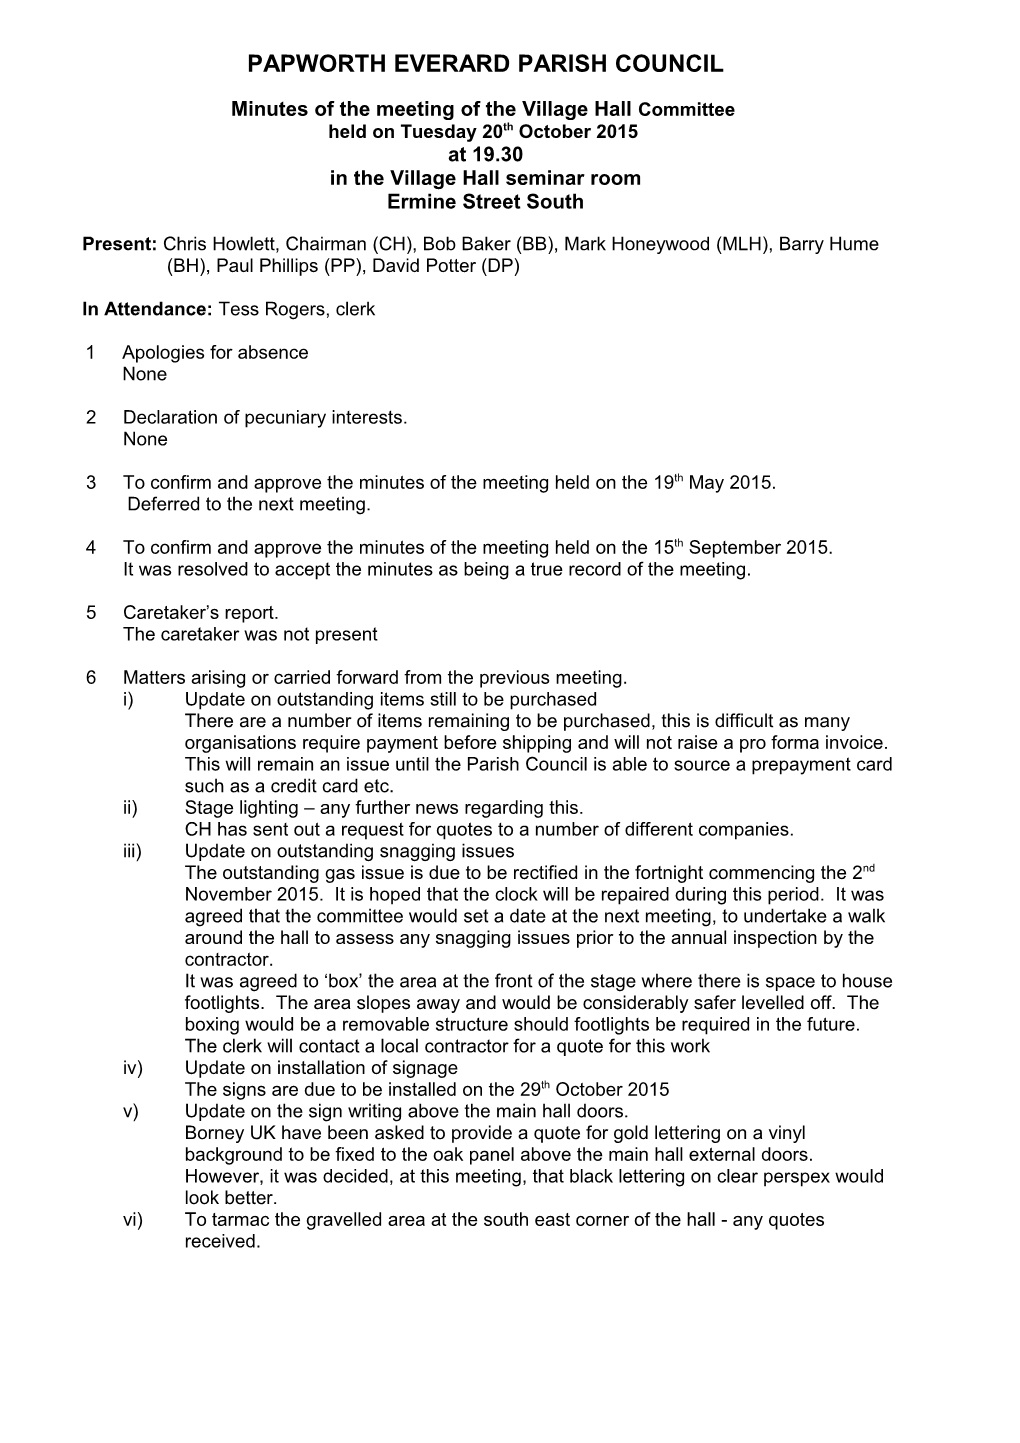 Minutes of the Meeting of the Village Hall Committee